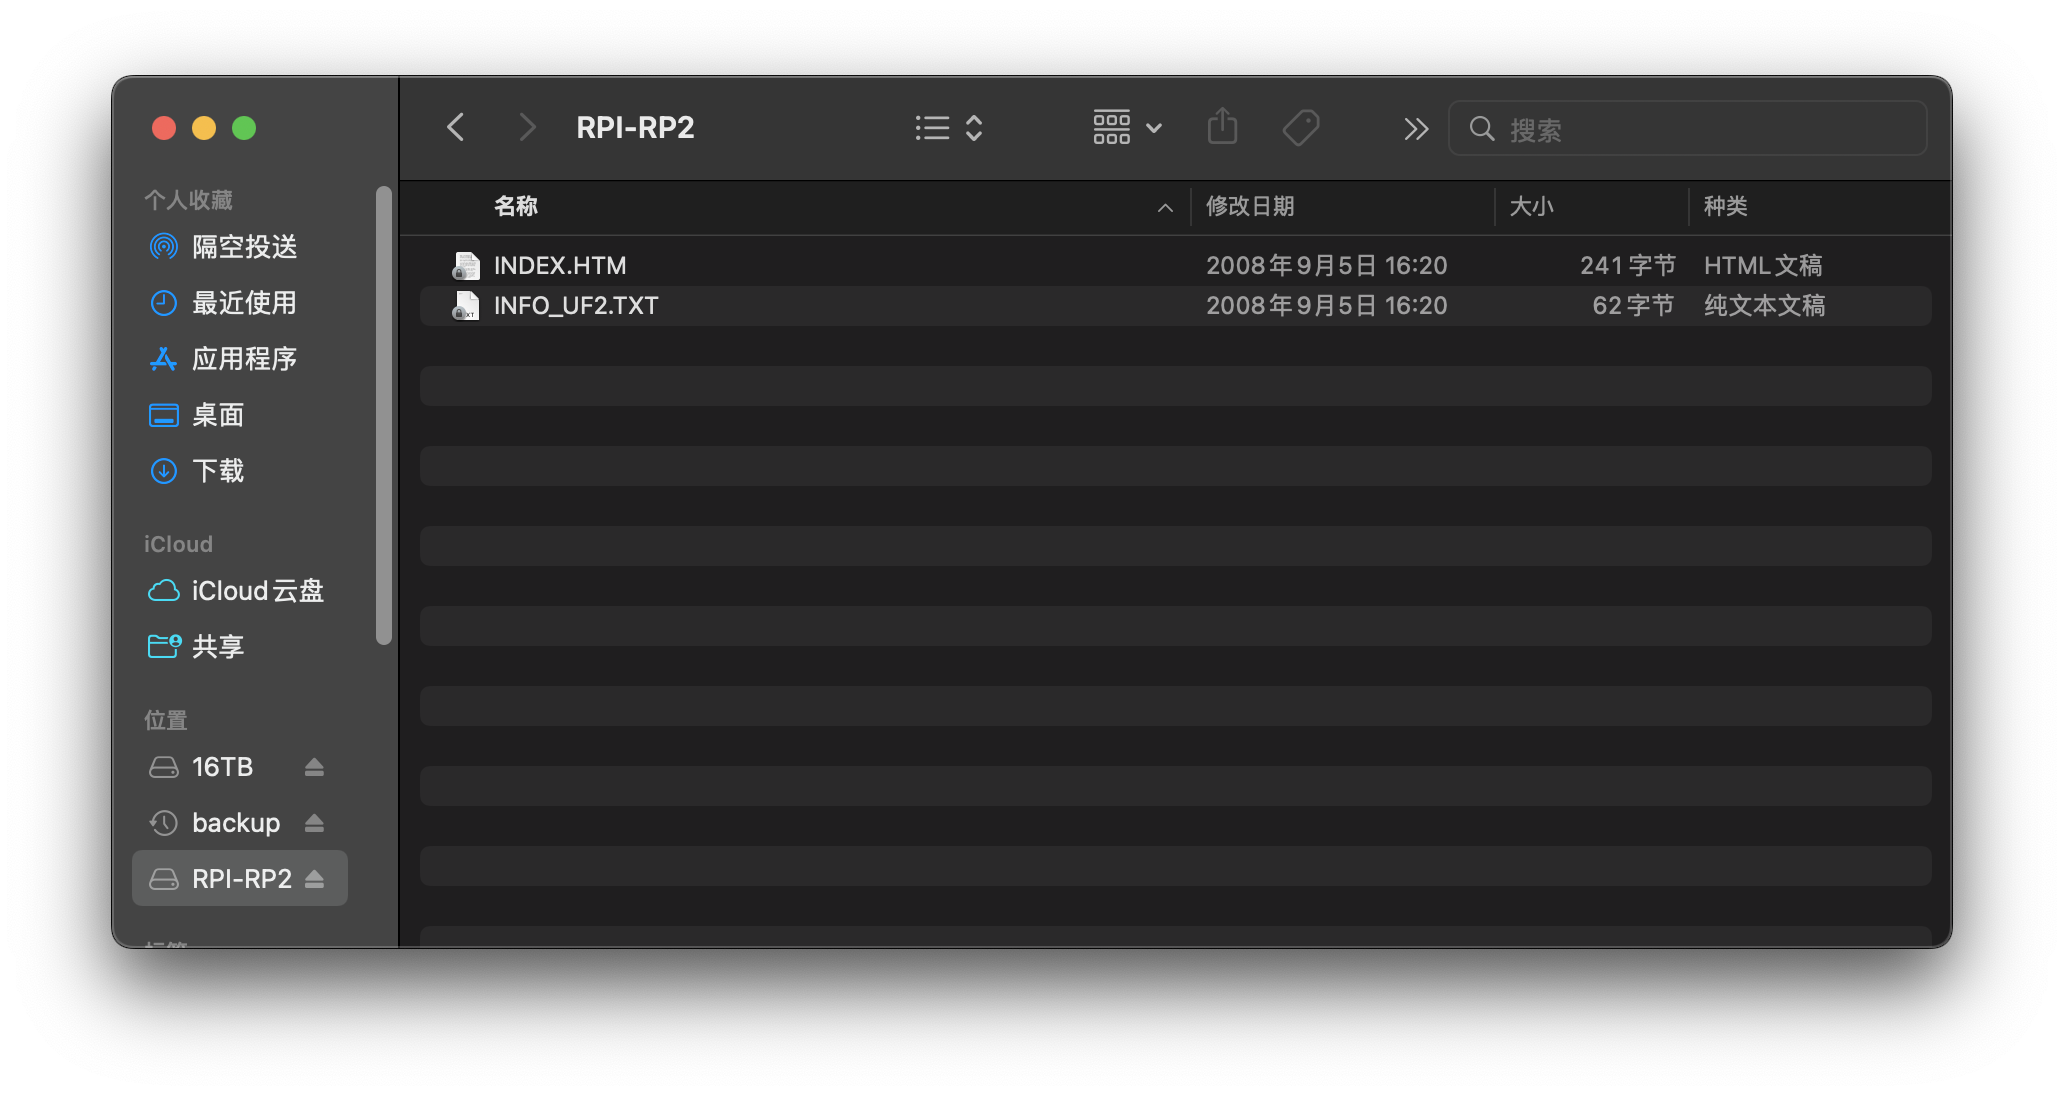 You can see RPI-RP2 in Finder